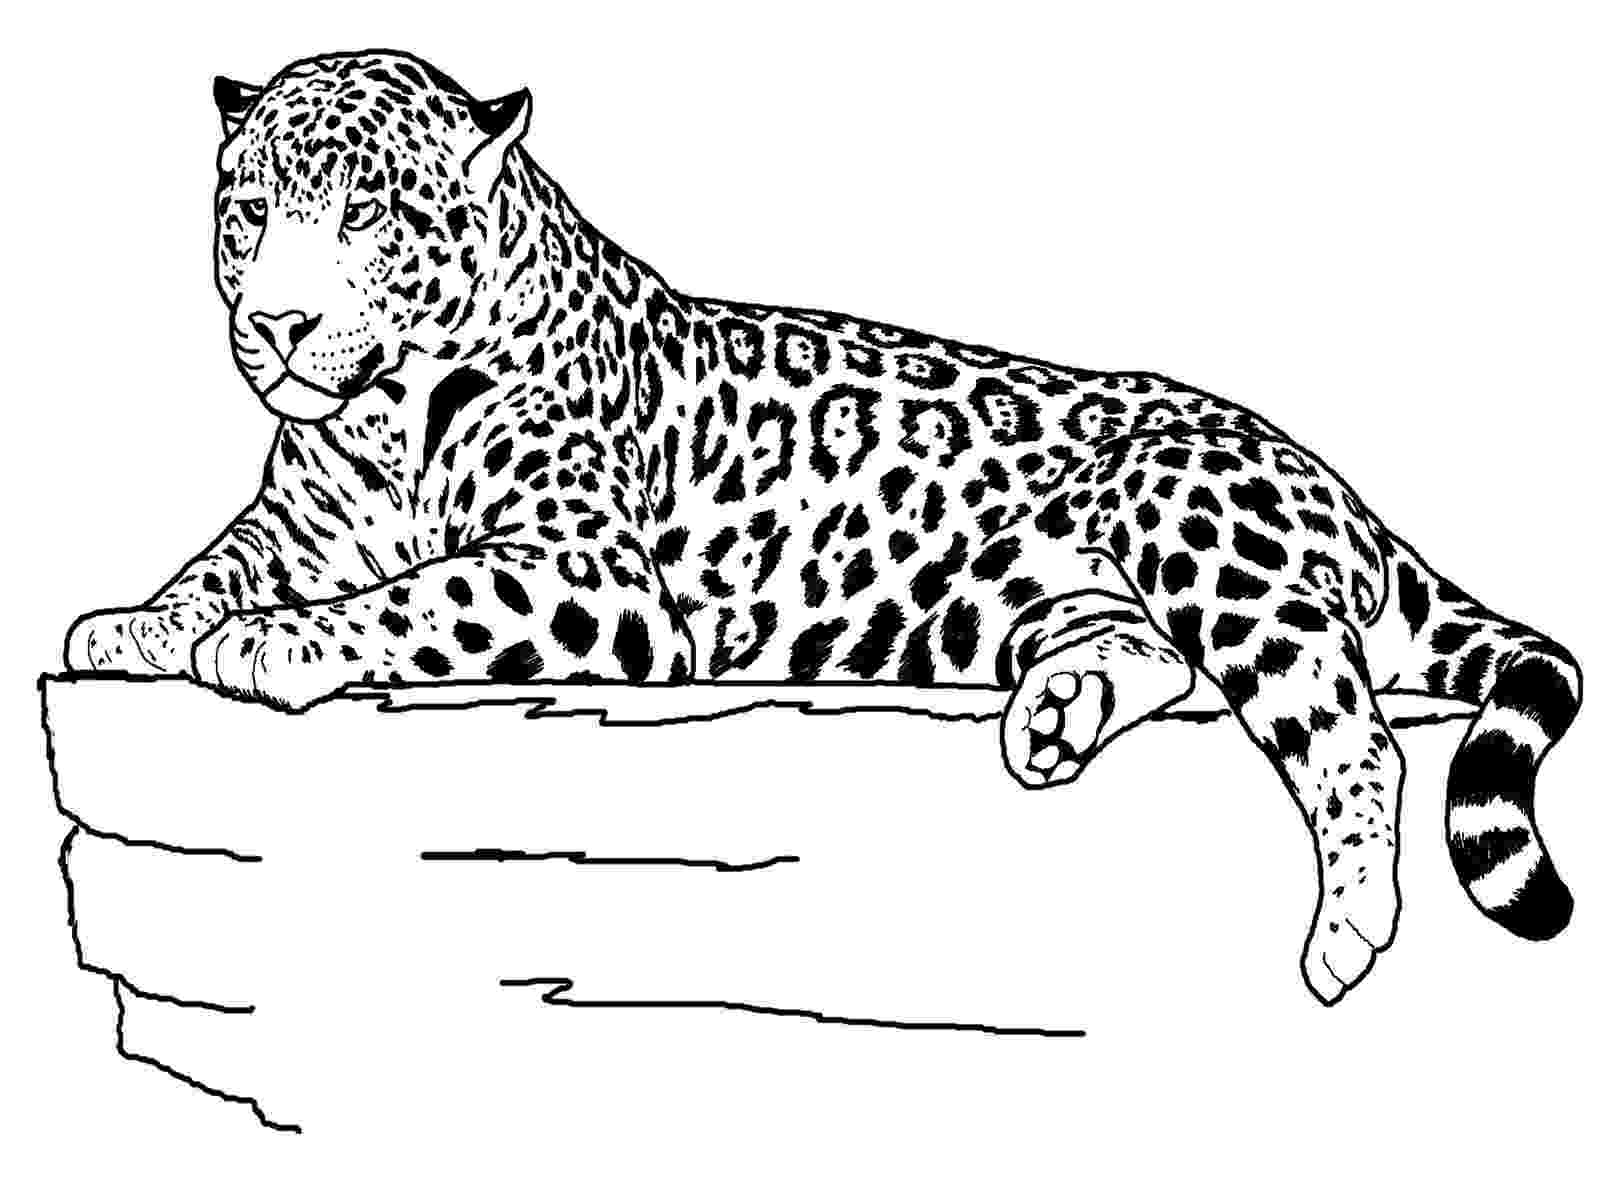 cheetah coloring pages for adults 20 best big cat coloring pages images on pinterest for pages cheetah coloring adults 